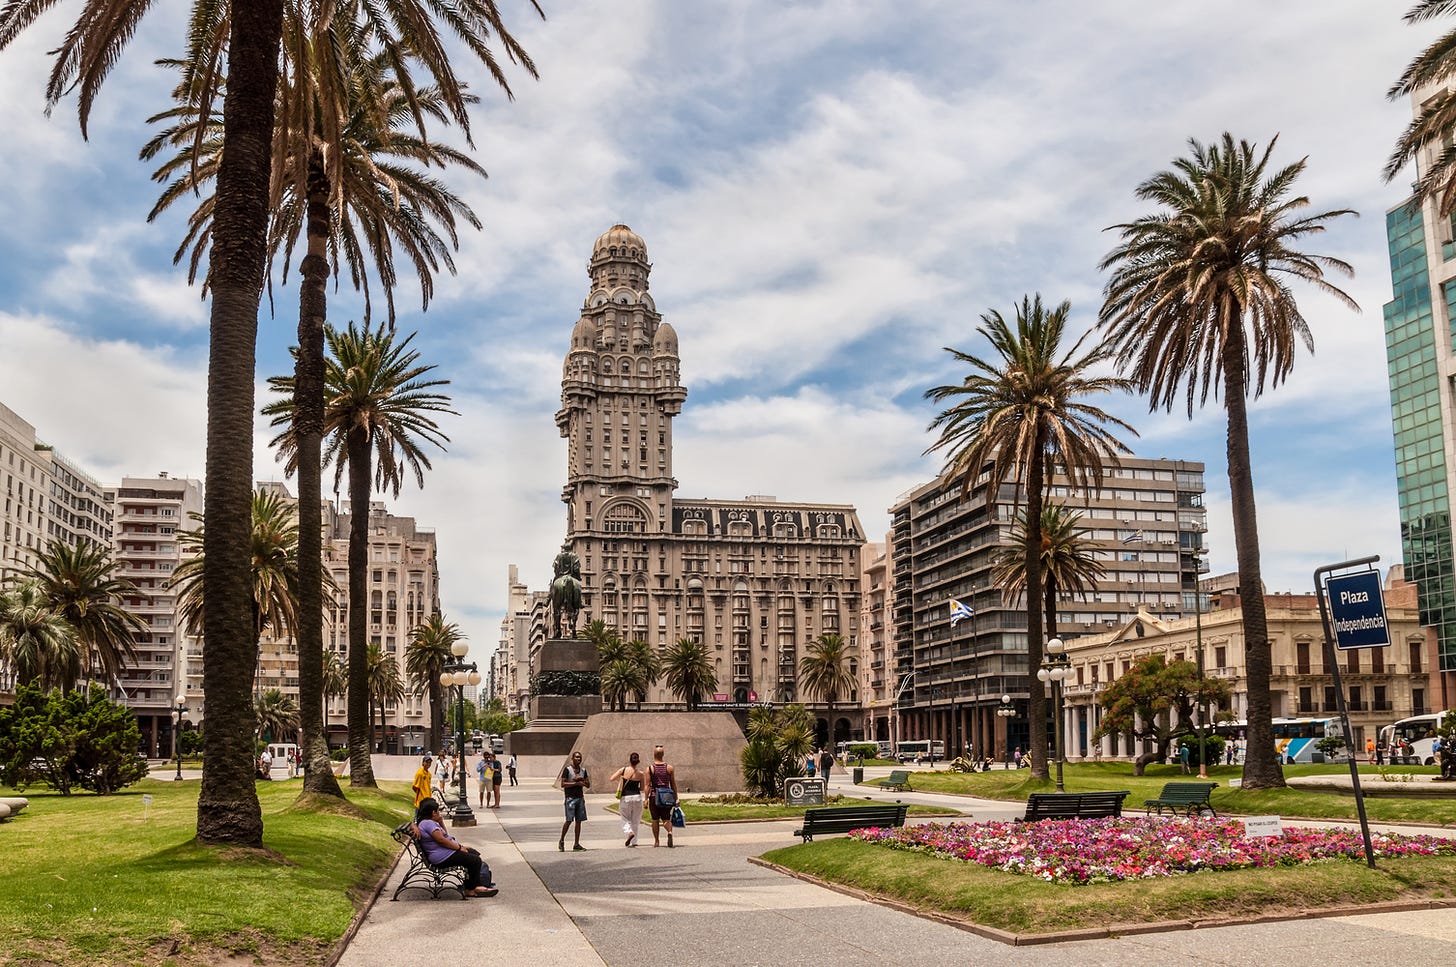 These Are The 20 Most Livable Cities in Latin America in 2019 - Image 1 of 11